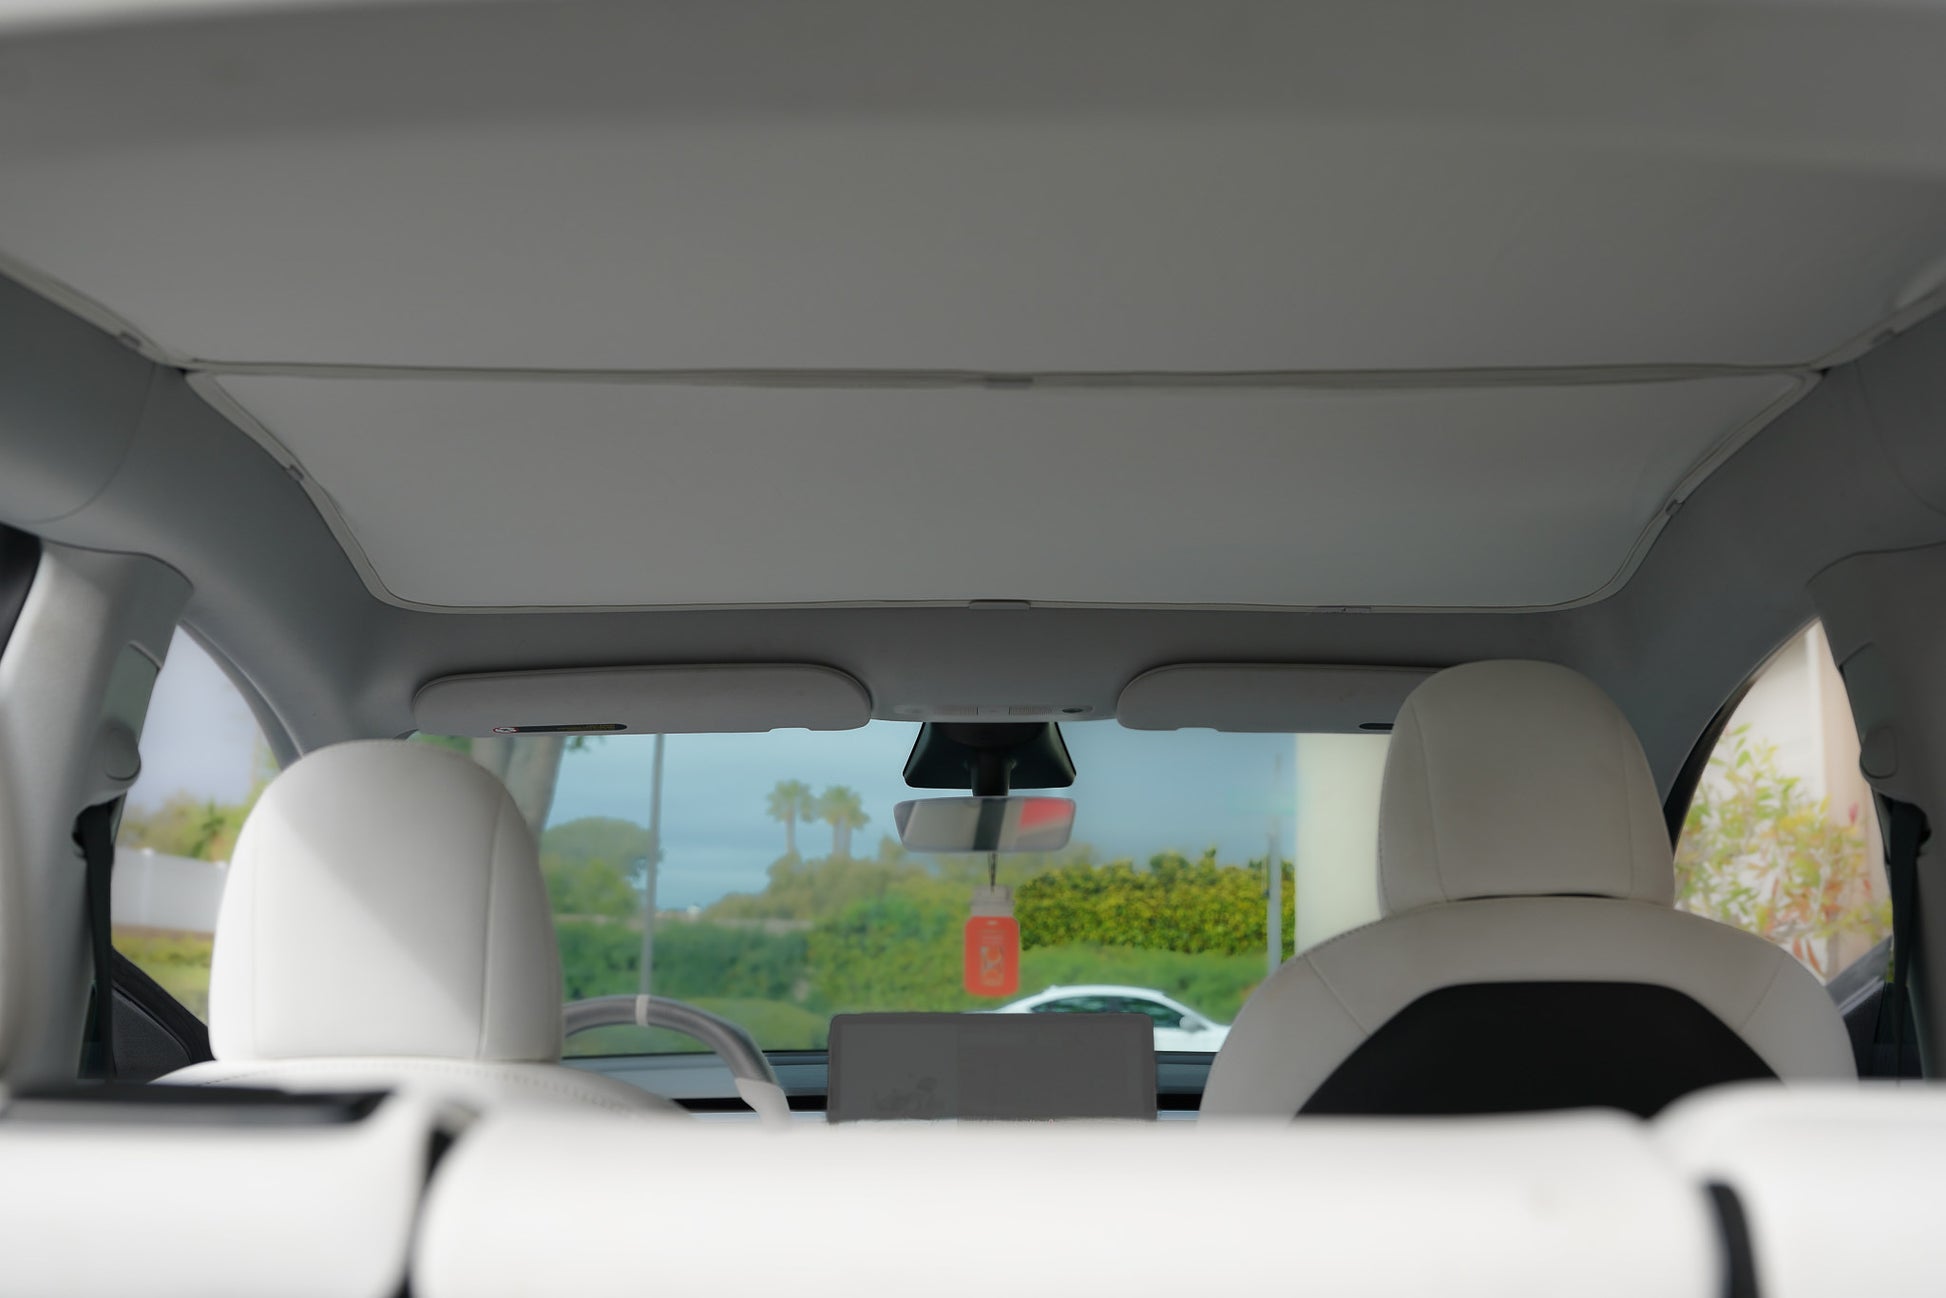 Tesla Model Y Glass Roof Sunshade 2 in 1 Kit (New Version) Available in Black and Beige Color - iCBL